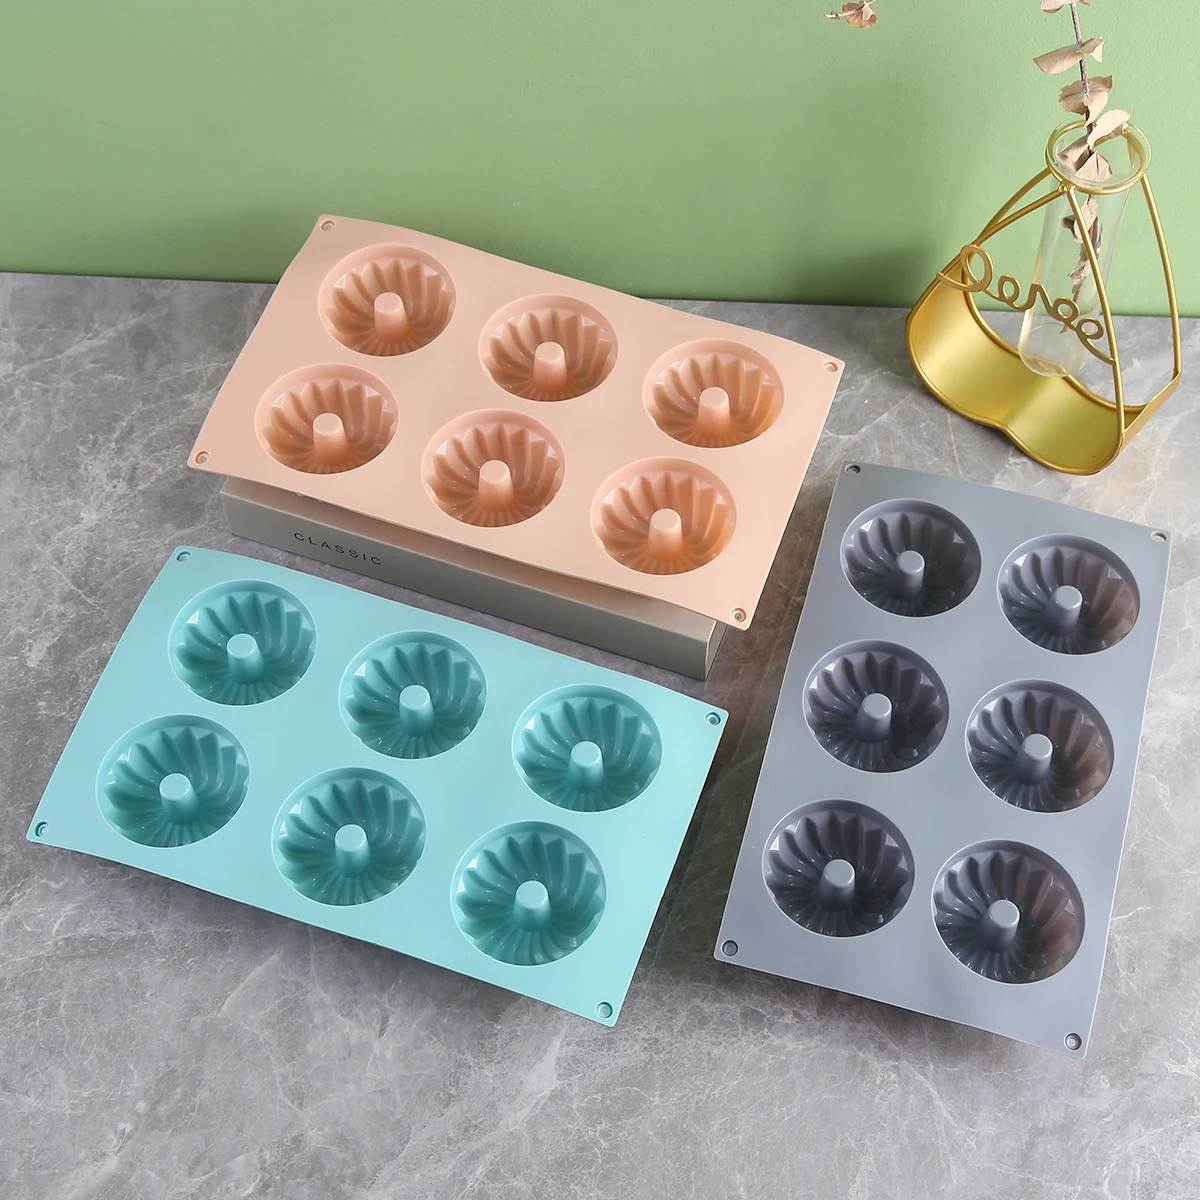 6 Cavity Donut Silicone Molds for Soap Cake Chocolate Cornbread Muffins Chocolate Ice Cubes Microwave Cake Making Mold